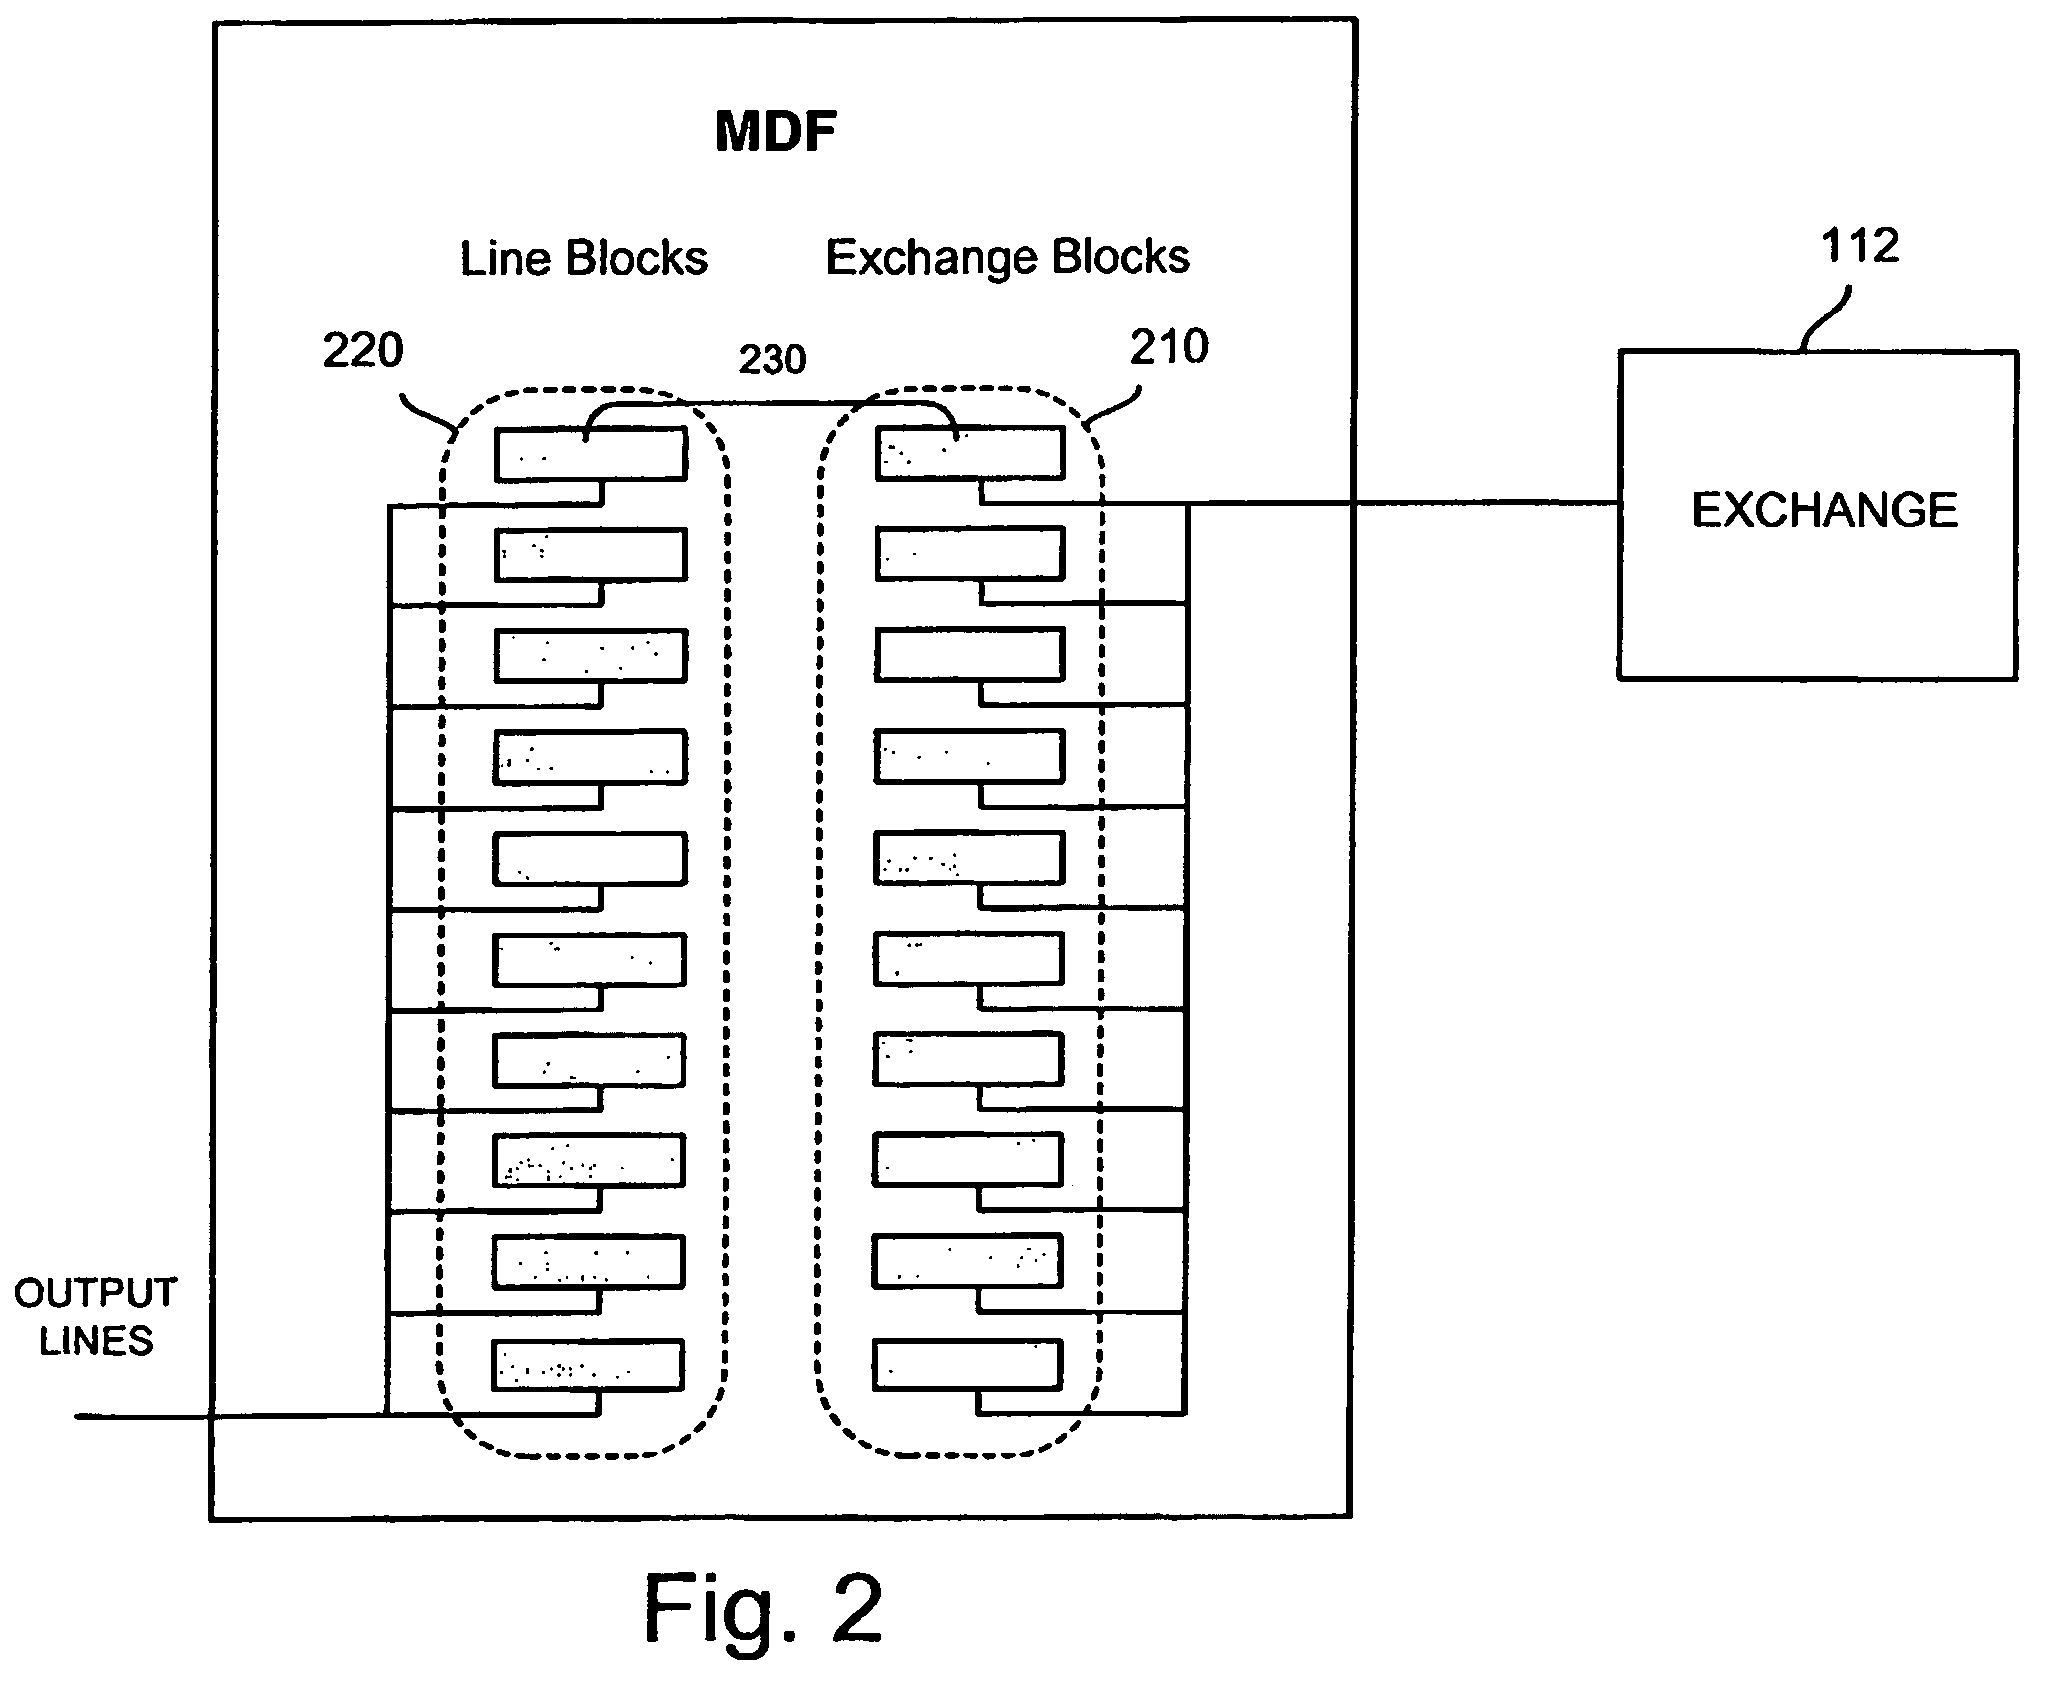 Method and system for remotely automating cross-connects in telecom networks